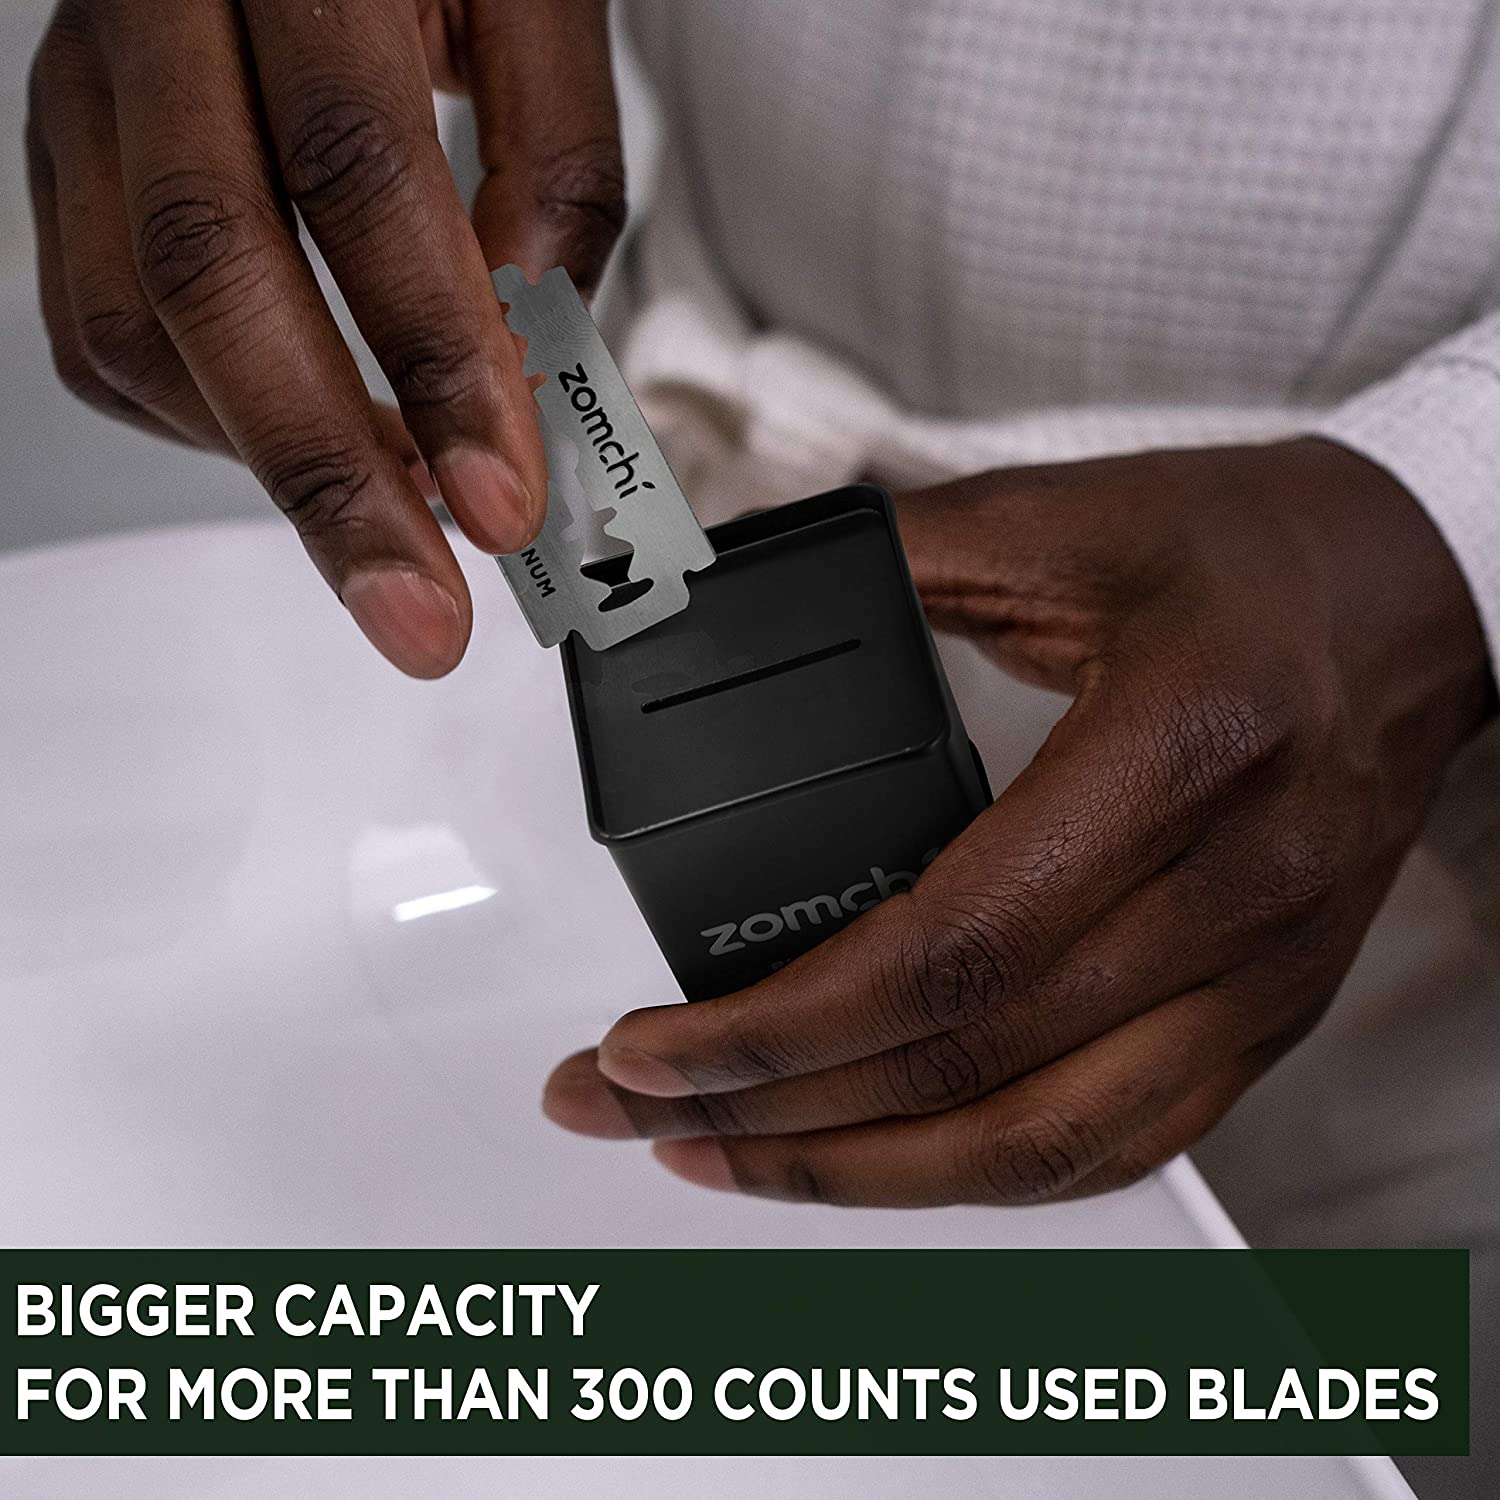 Zomchi Blades Bank Have Bigger Capacity For More Than 300 Counts Used Blades